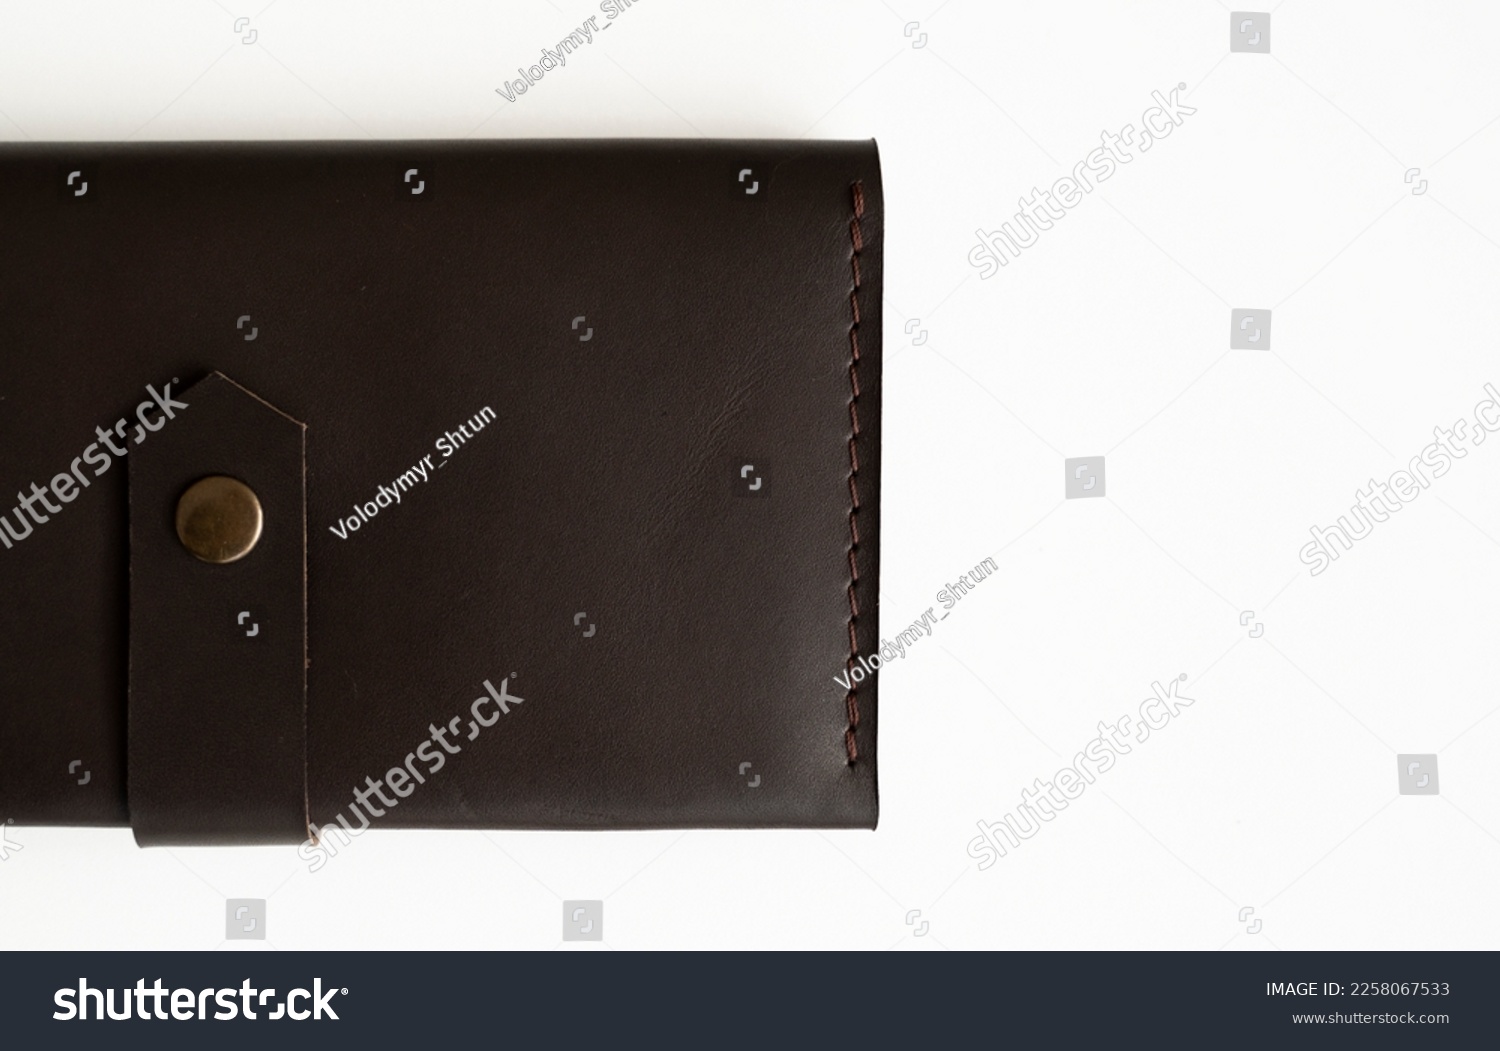 Wallet made of genuine black leather with a slots for cards and big zip pocket on a white background. Accessories for men. #2258067533